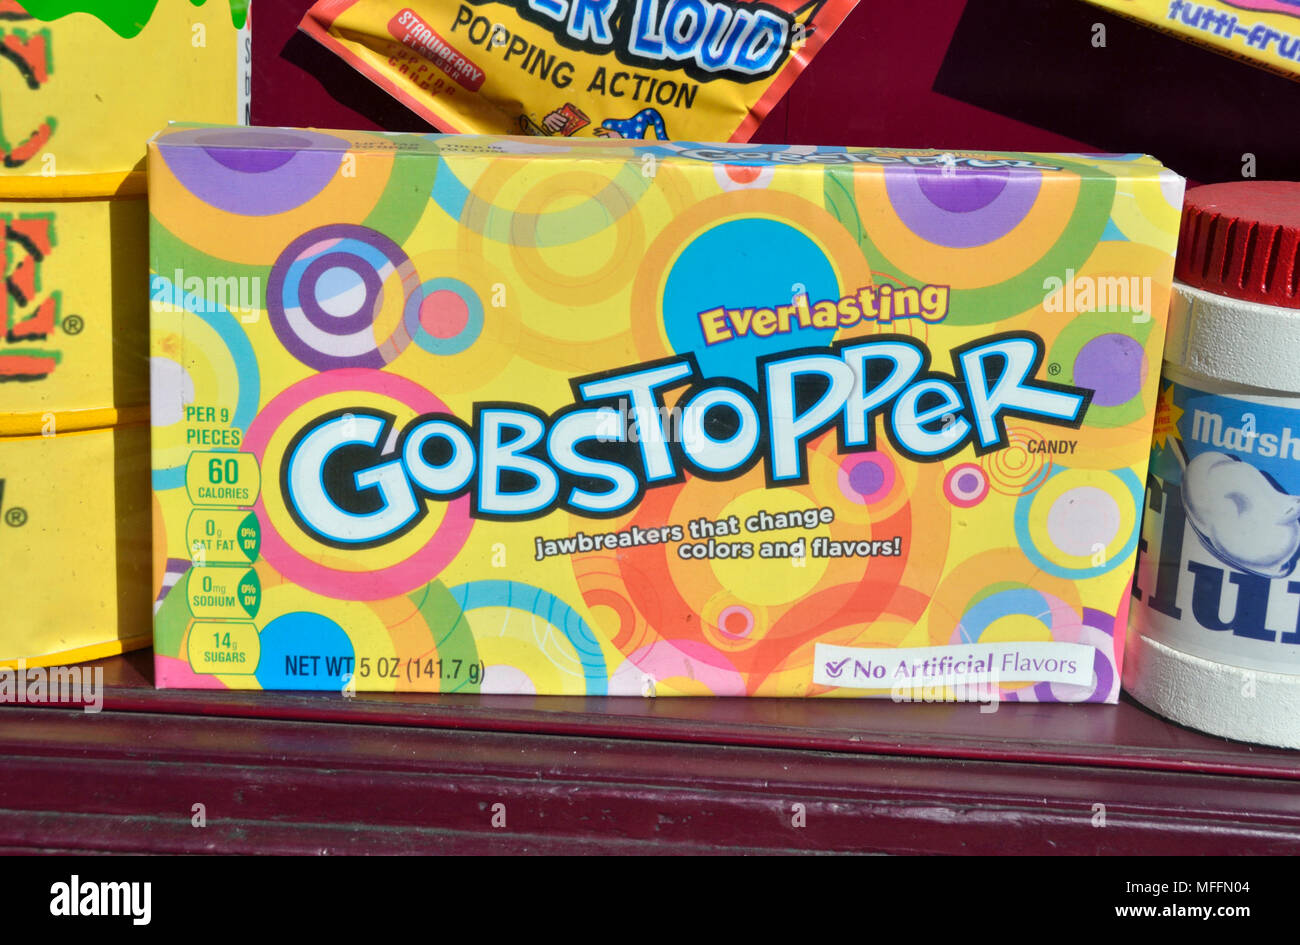 Gobstopper sweets packet in a shop window. Stock Photo